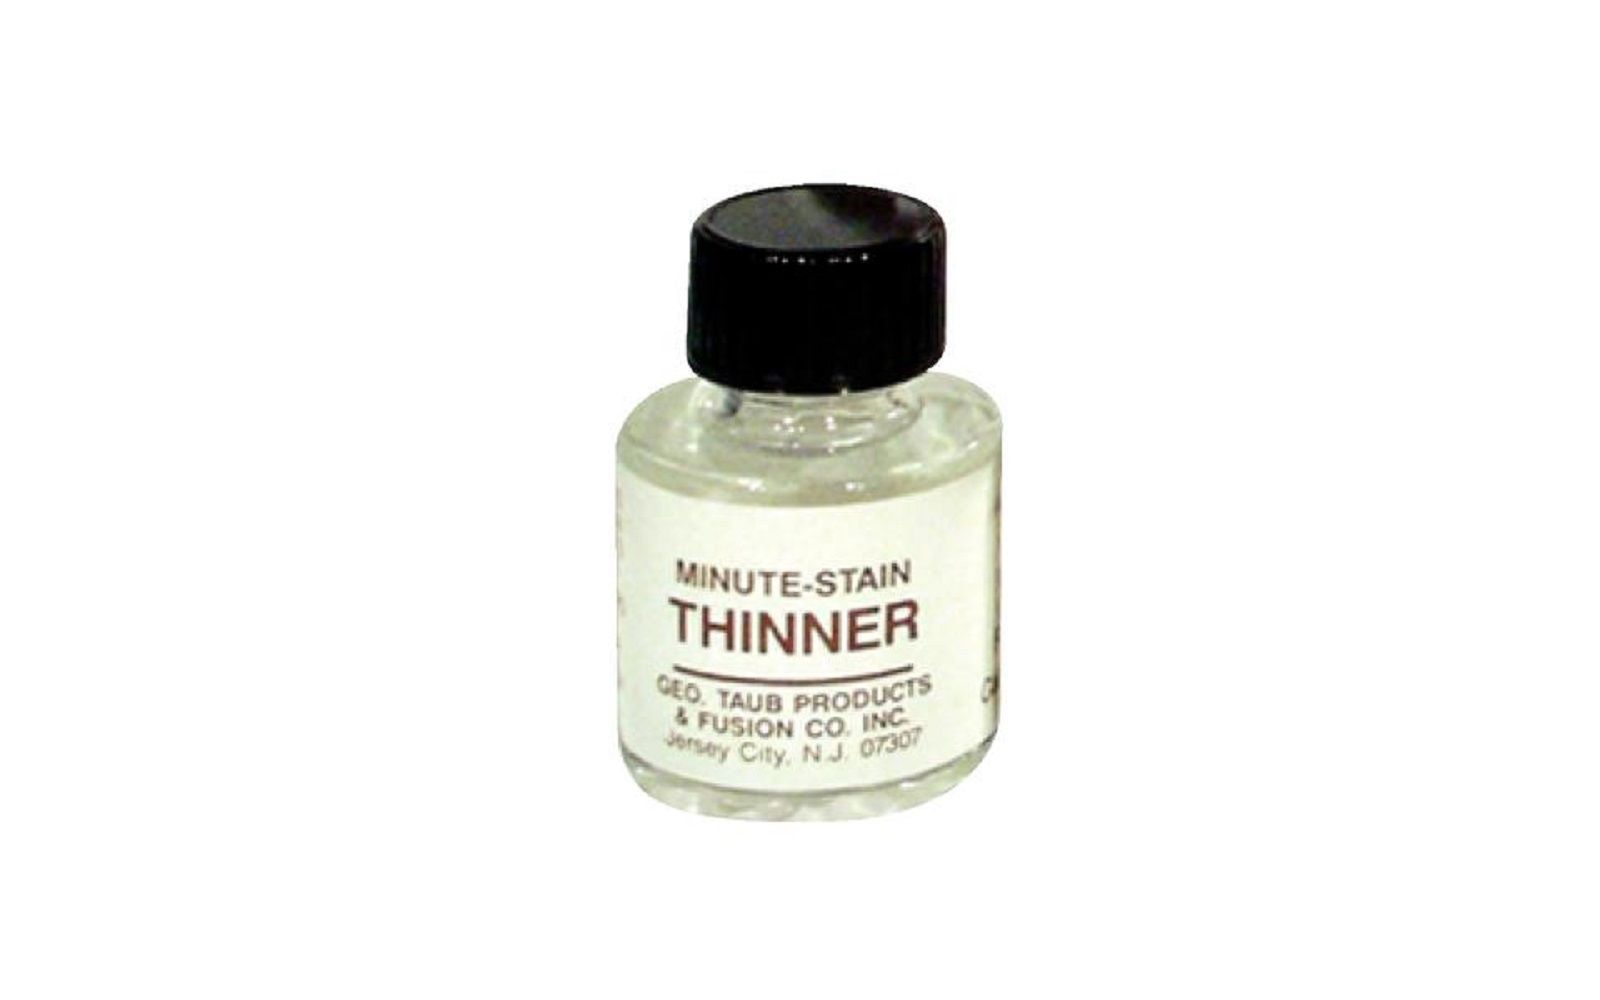 Minute stain thinner - taub